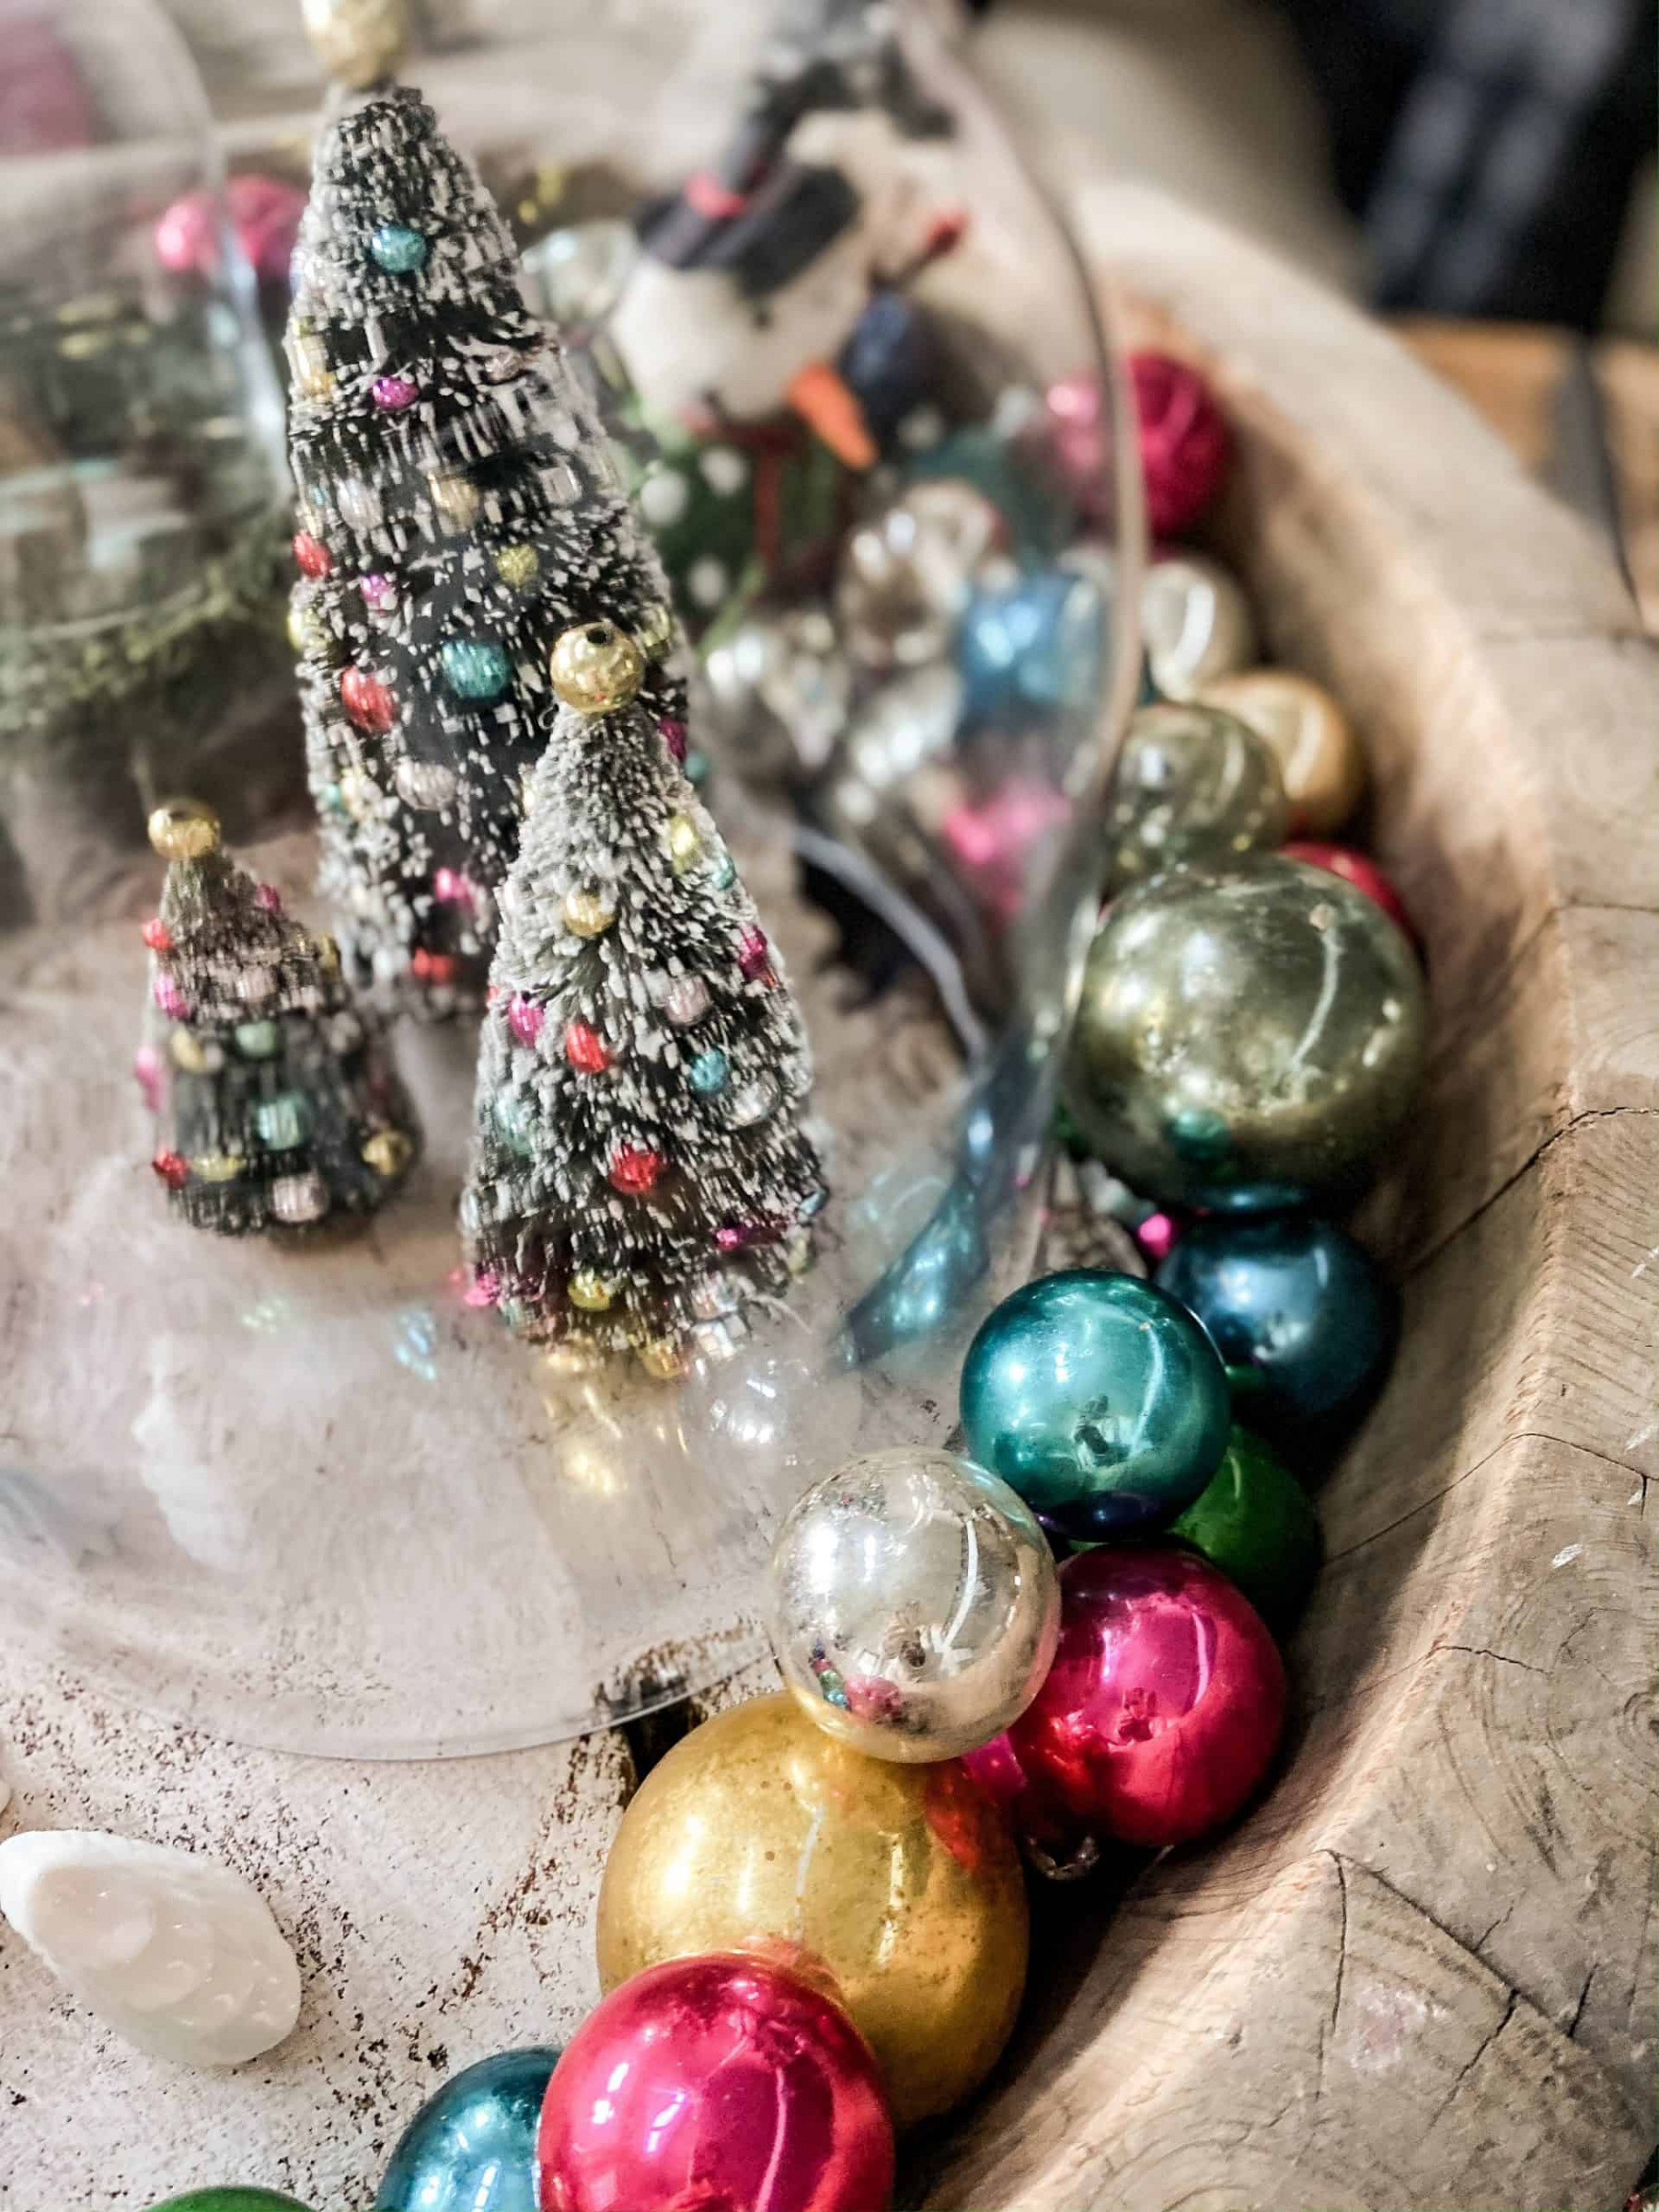 How To Repurpose Old Christmas Decor for an updated look.